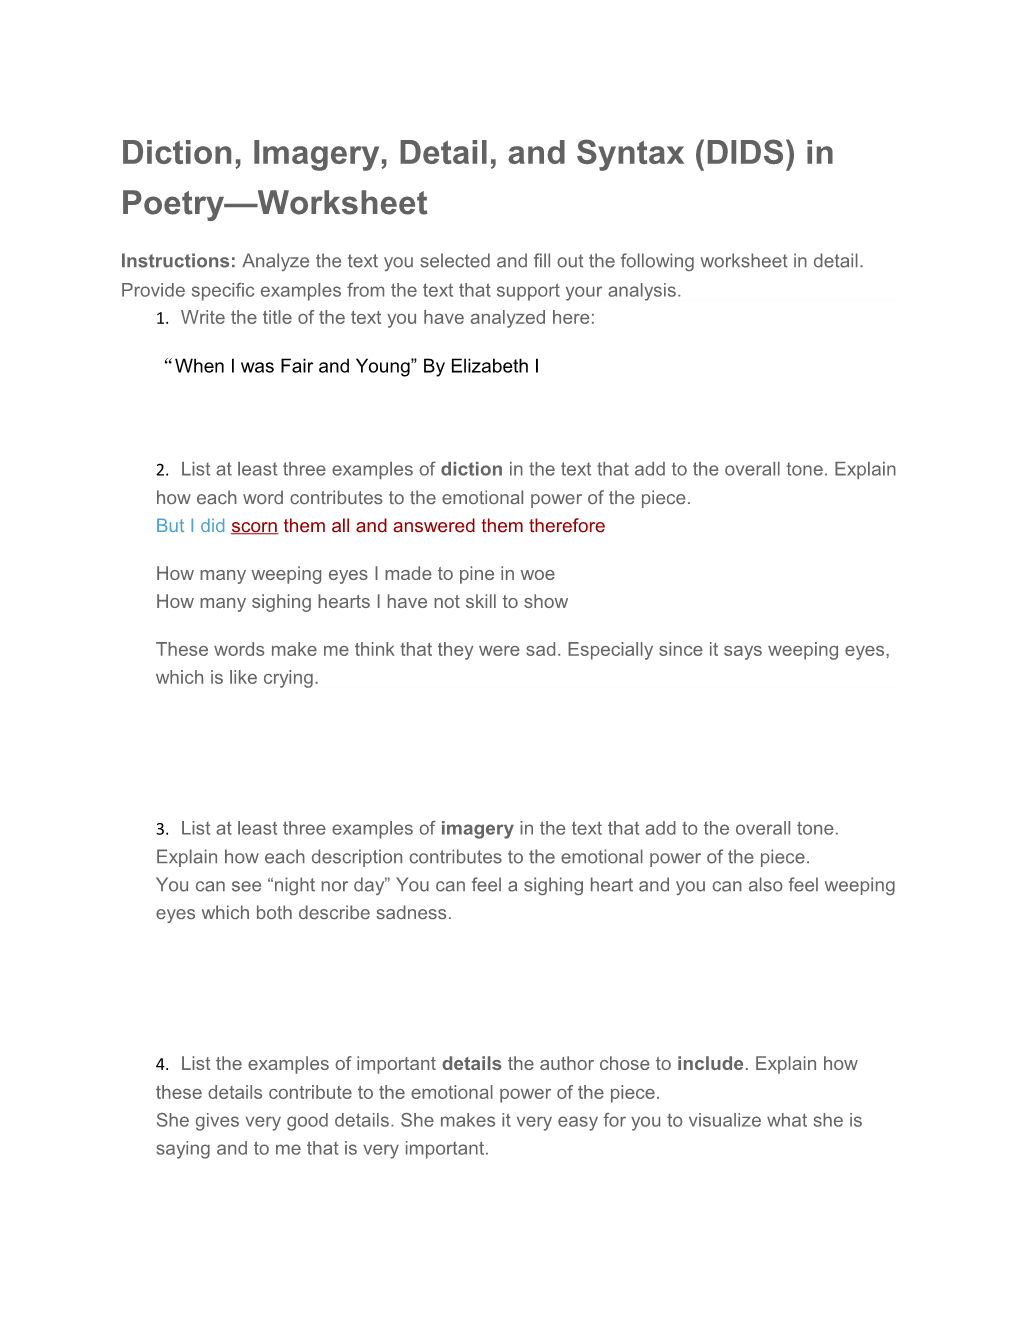 Diction, Imagery, Detail, and Syntax (DIDS) in Poetry Worksheet